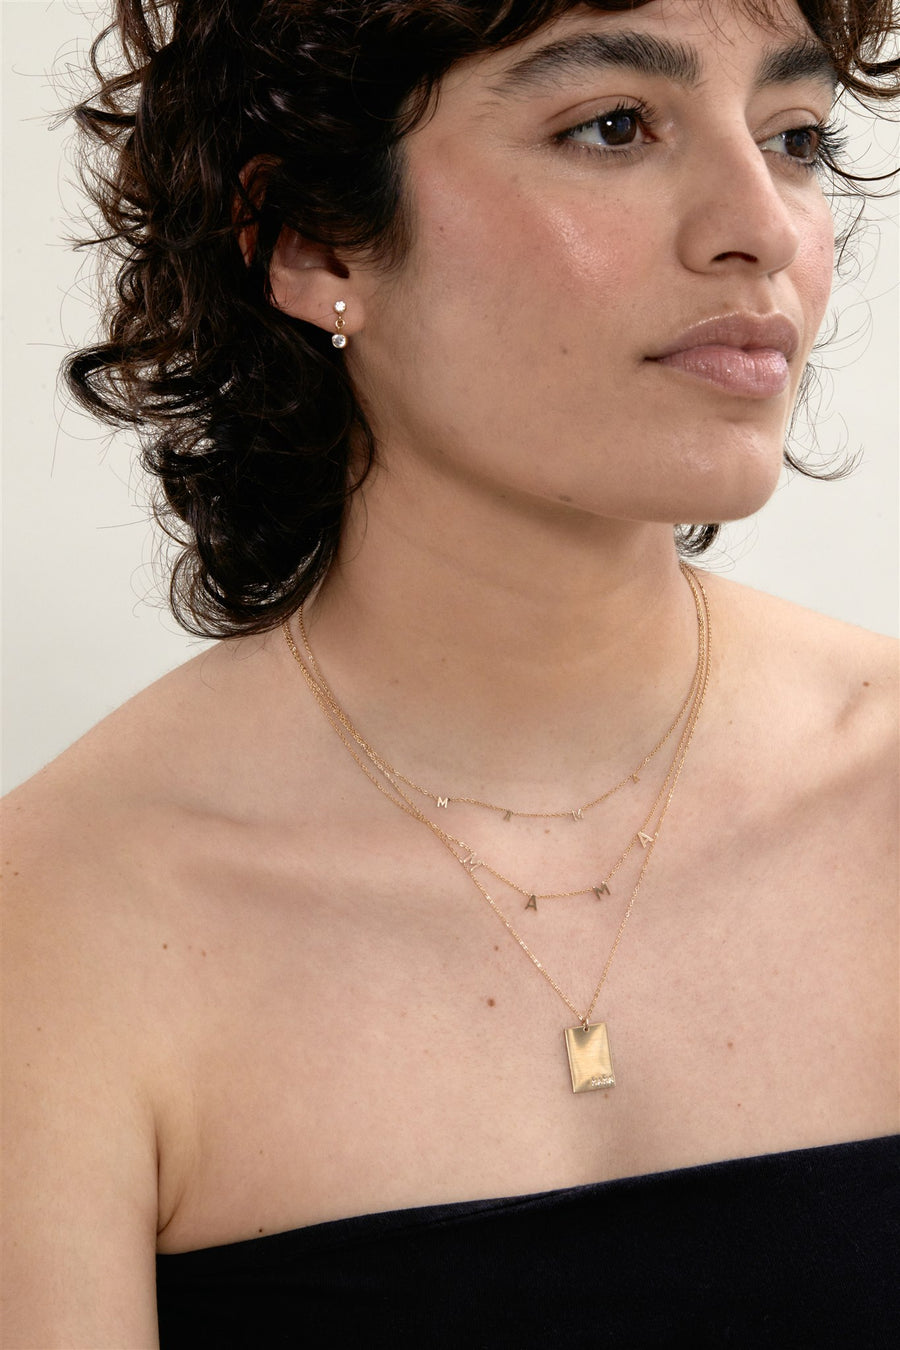 Goldie "MAMA" Necklace